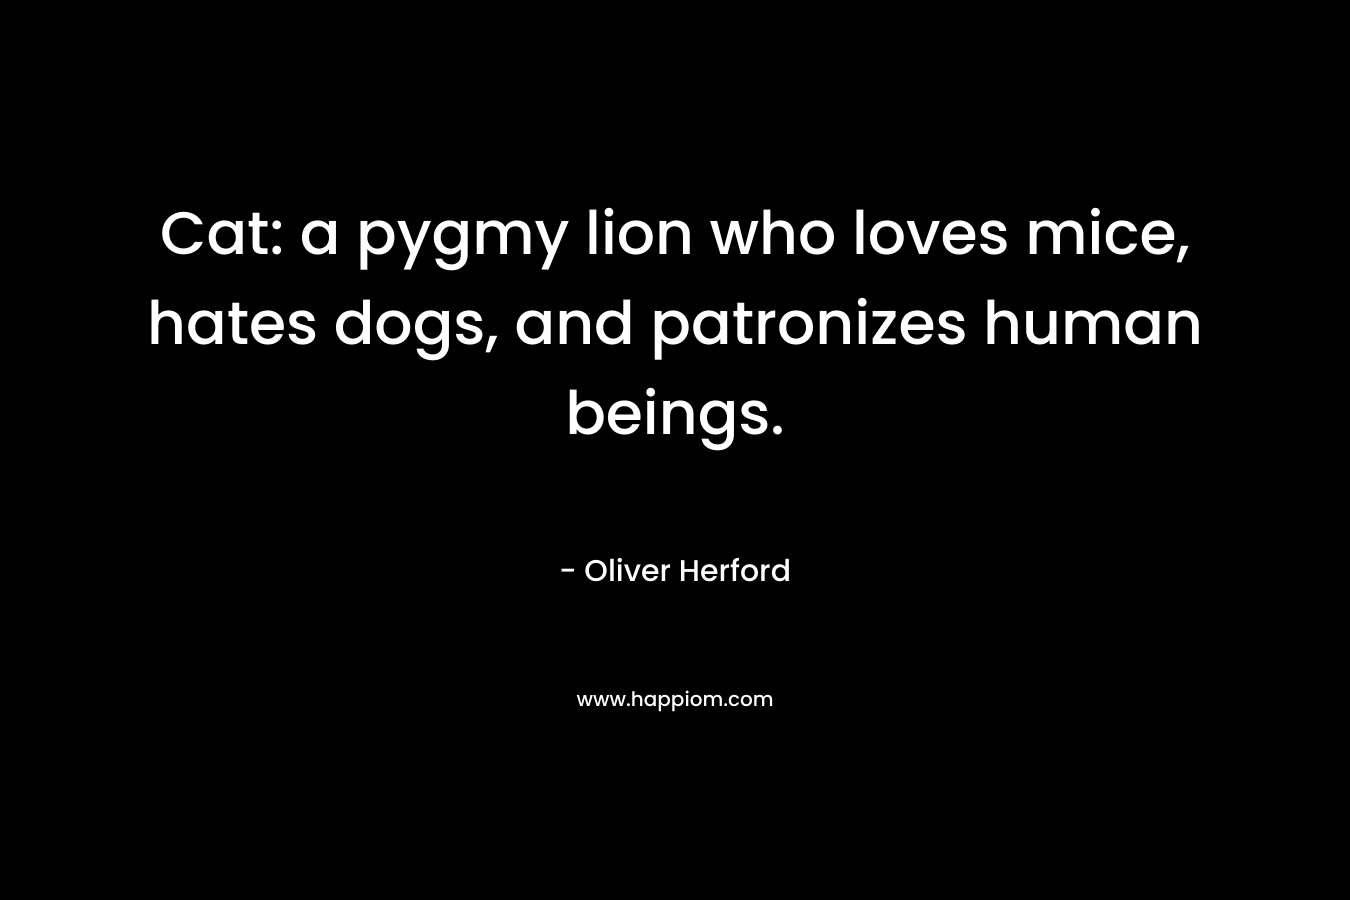 Cat: a pygmy lion who loves mice, hates dogs, and patronizes human beings. – Oliver Herford